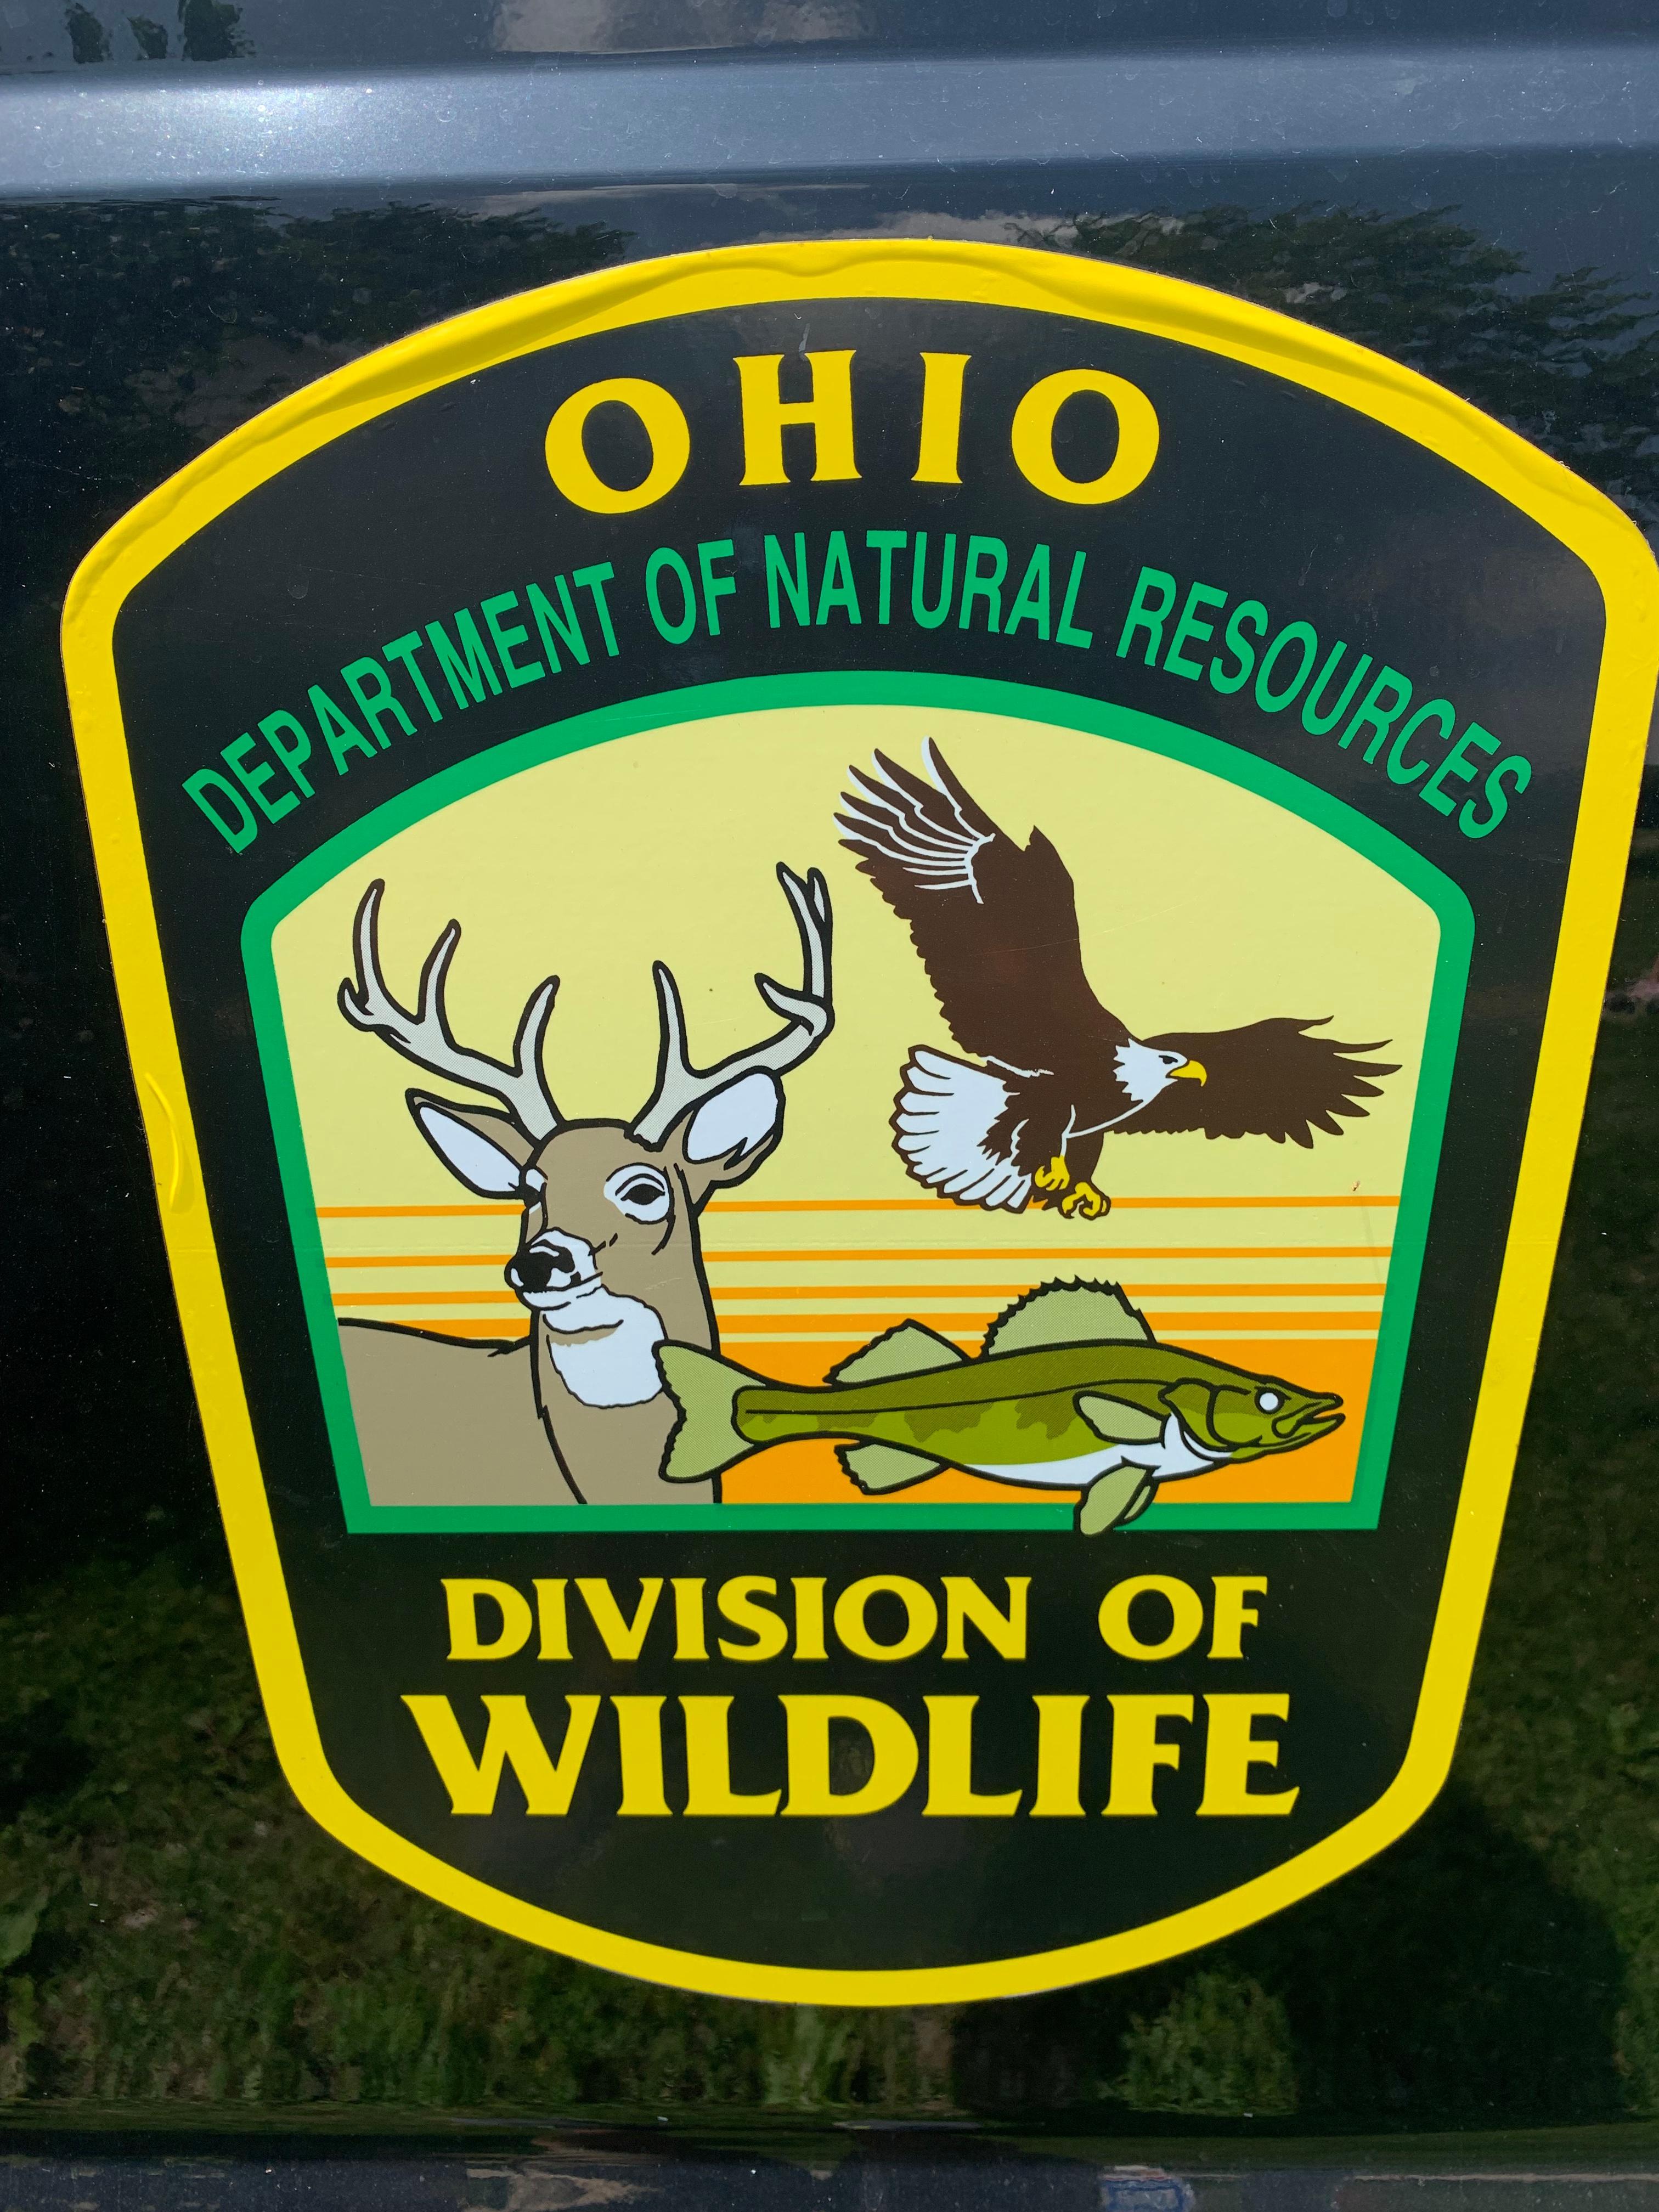 Ohio Department of Natural Resources sign